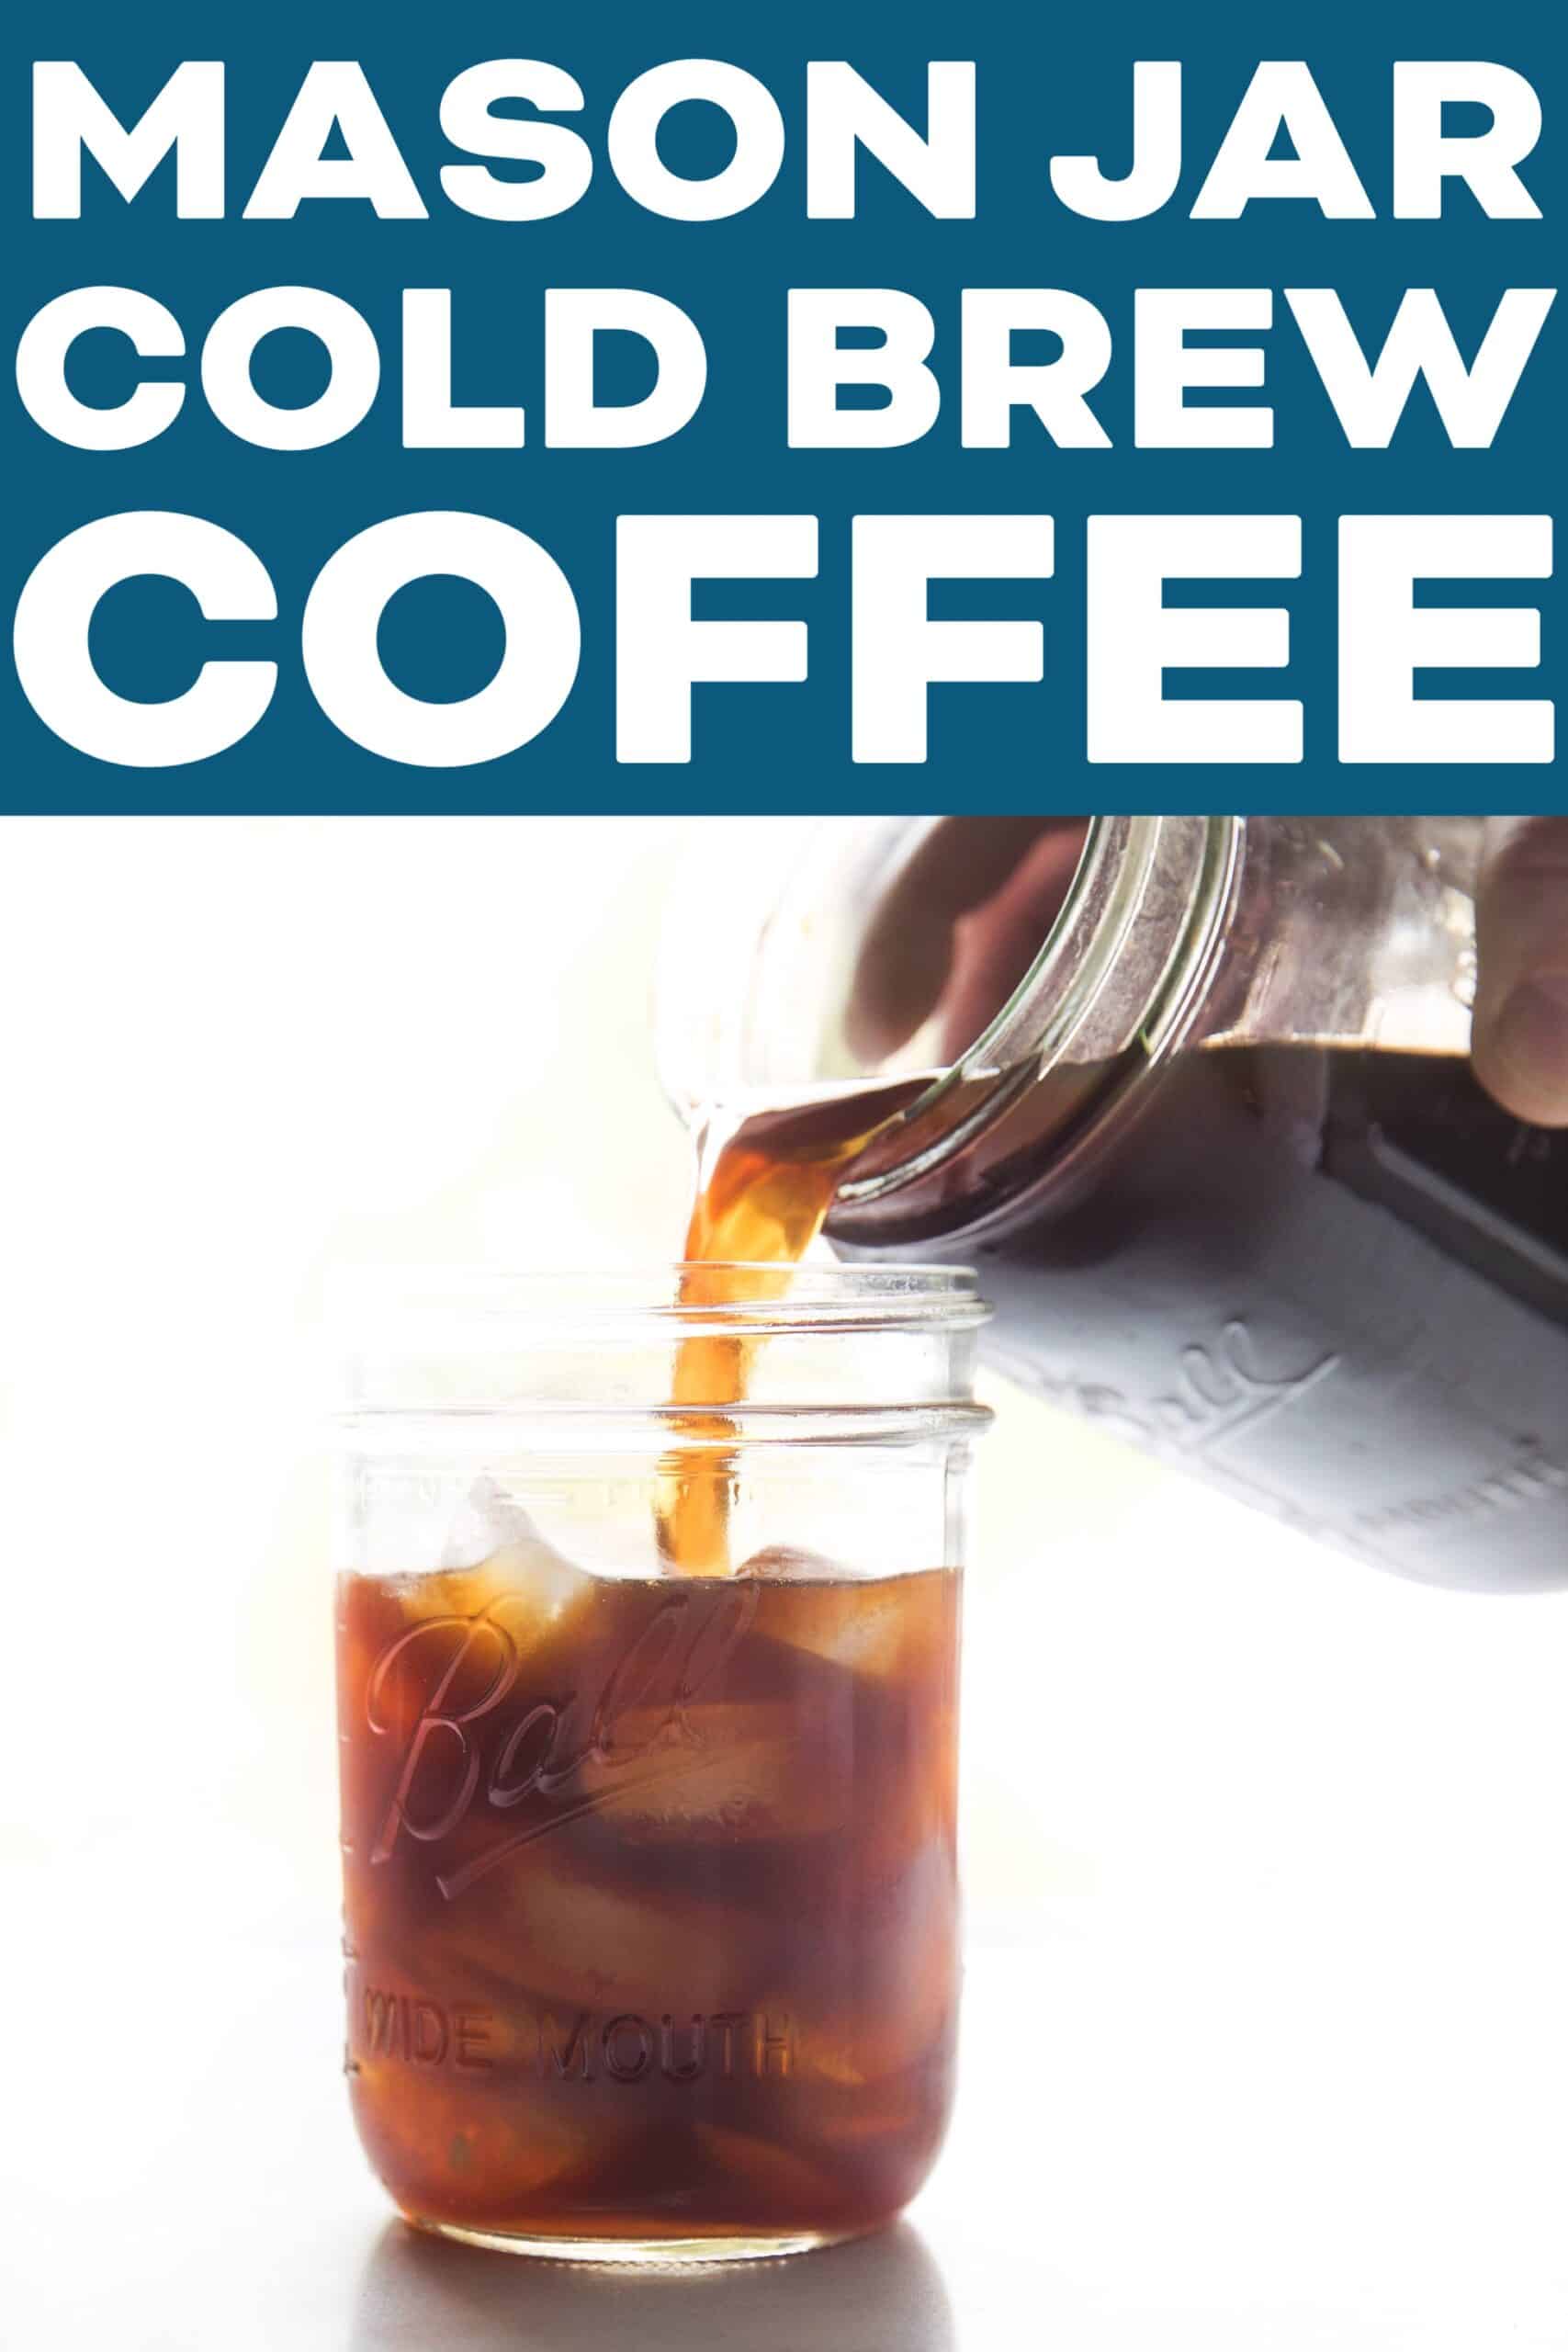 https://www.tasteslovely.com/wp-content/uploads/3000/03/How-To-Make-Cold-Brew-Coffee-In-A-Mason-Jar-scaled.jpg